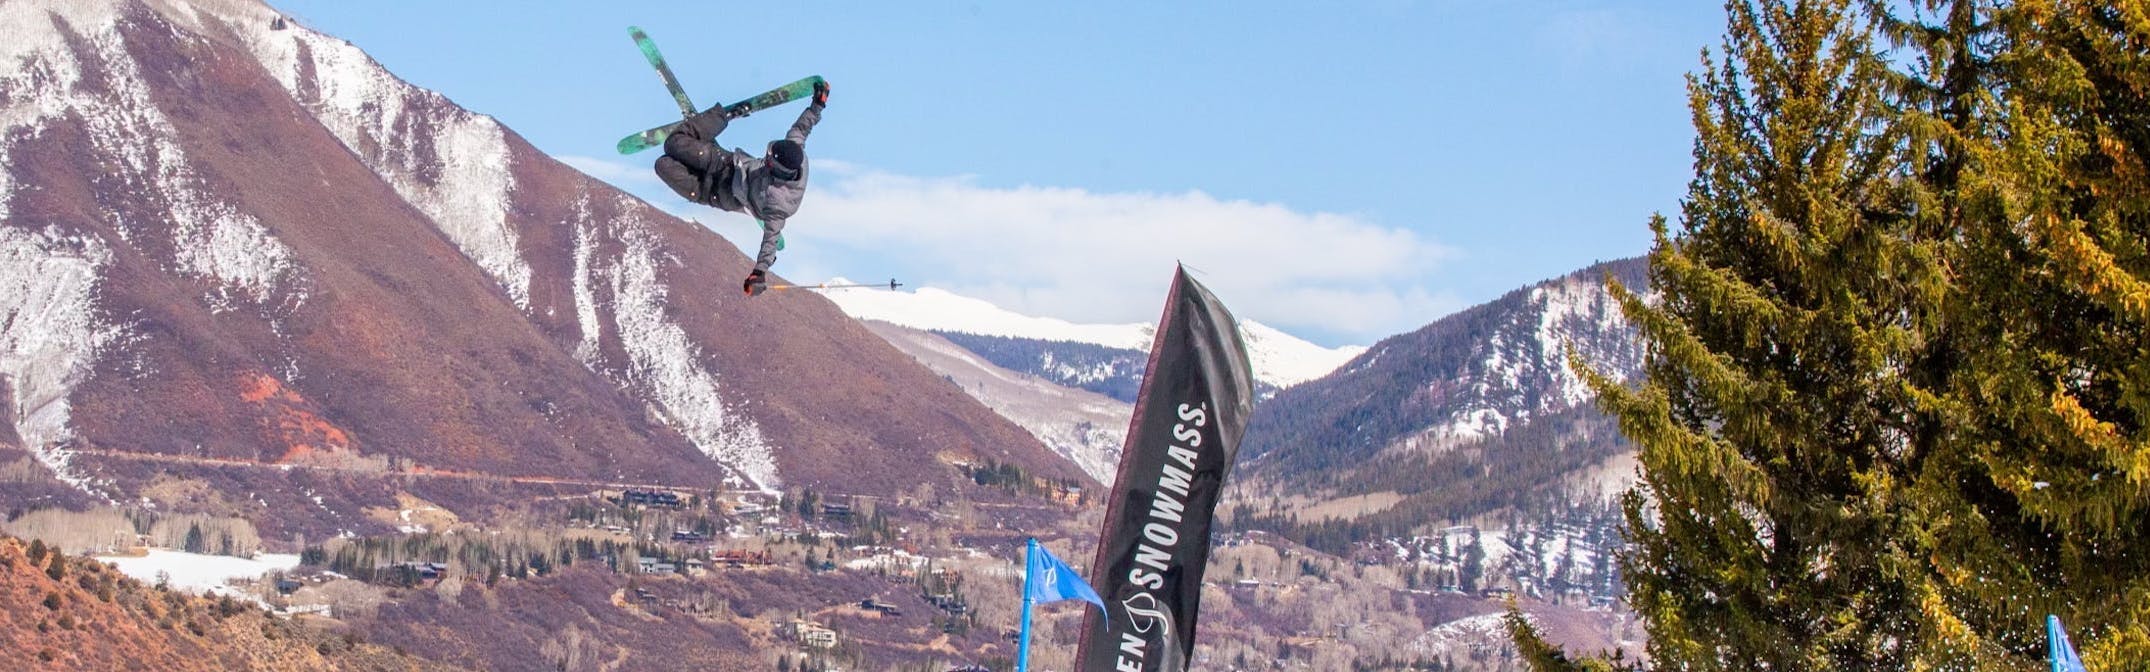 A skier goes off a jump at a ski resort. There are mountains in the background.